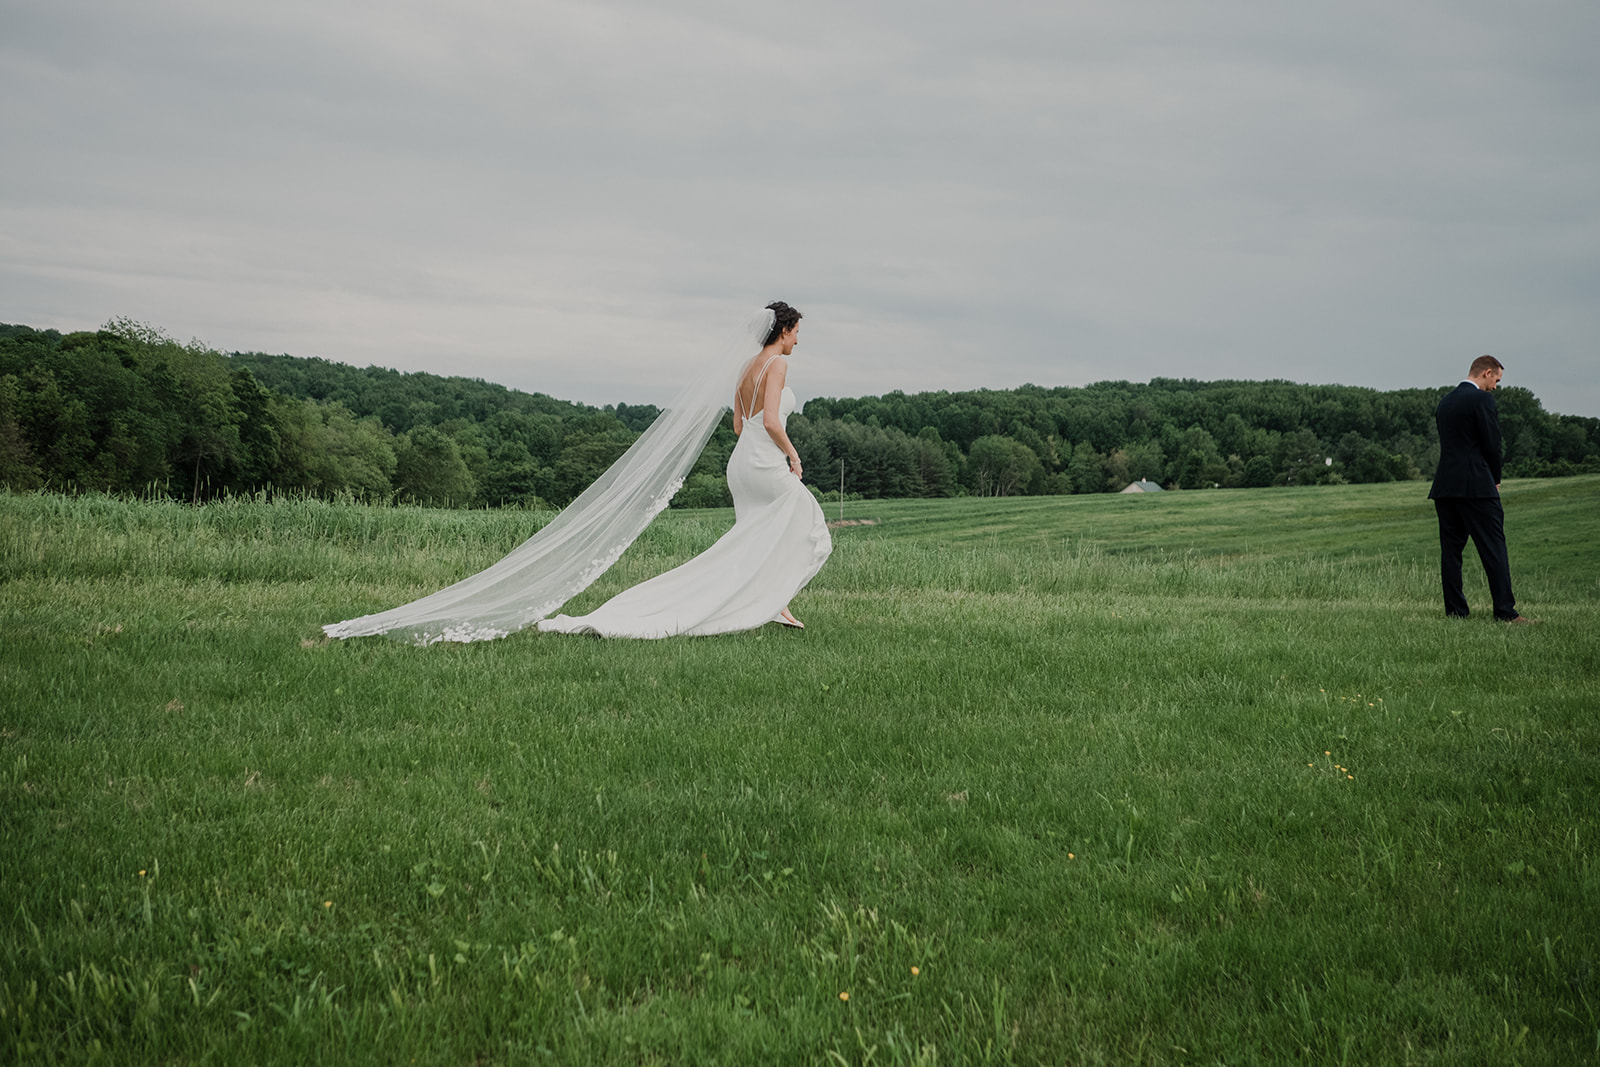 A bride with a long veil walks through a field towards her groom for a first look before their outdoor wedding ceremony at Blue Hill Farm in Waterford, VA.